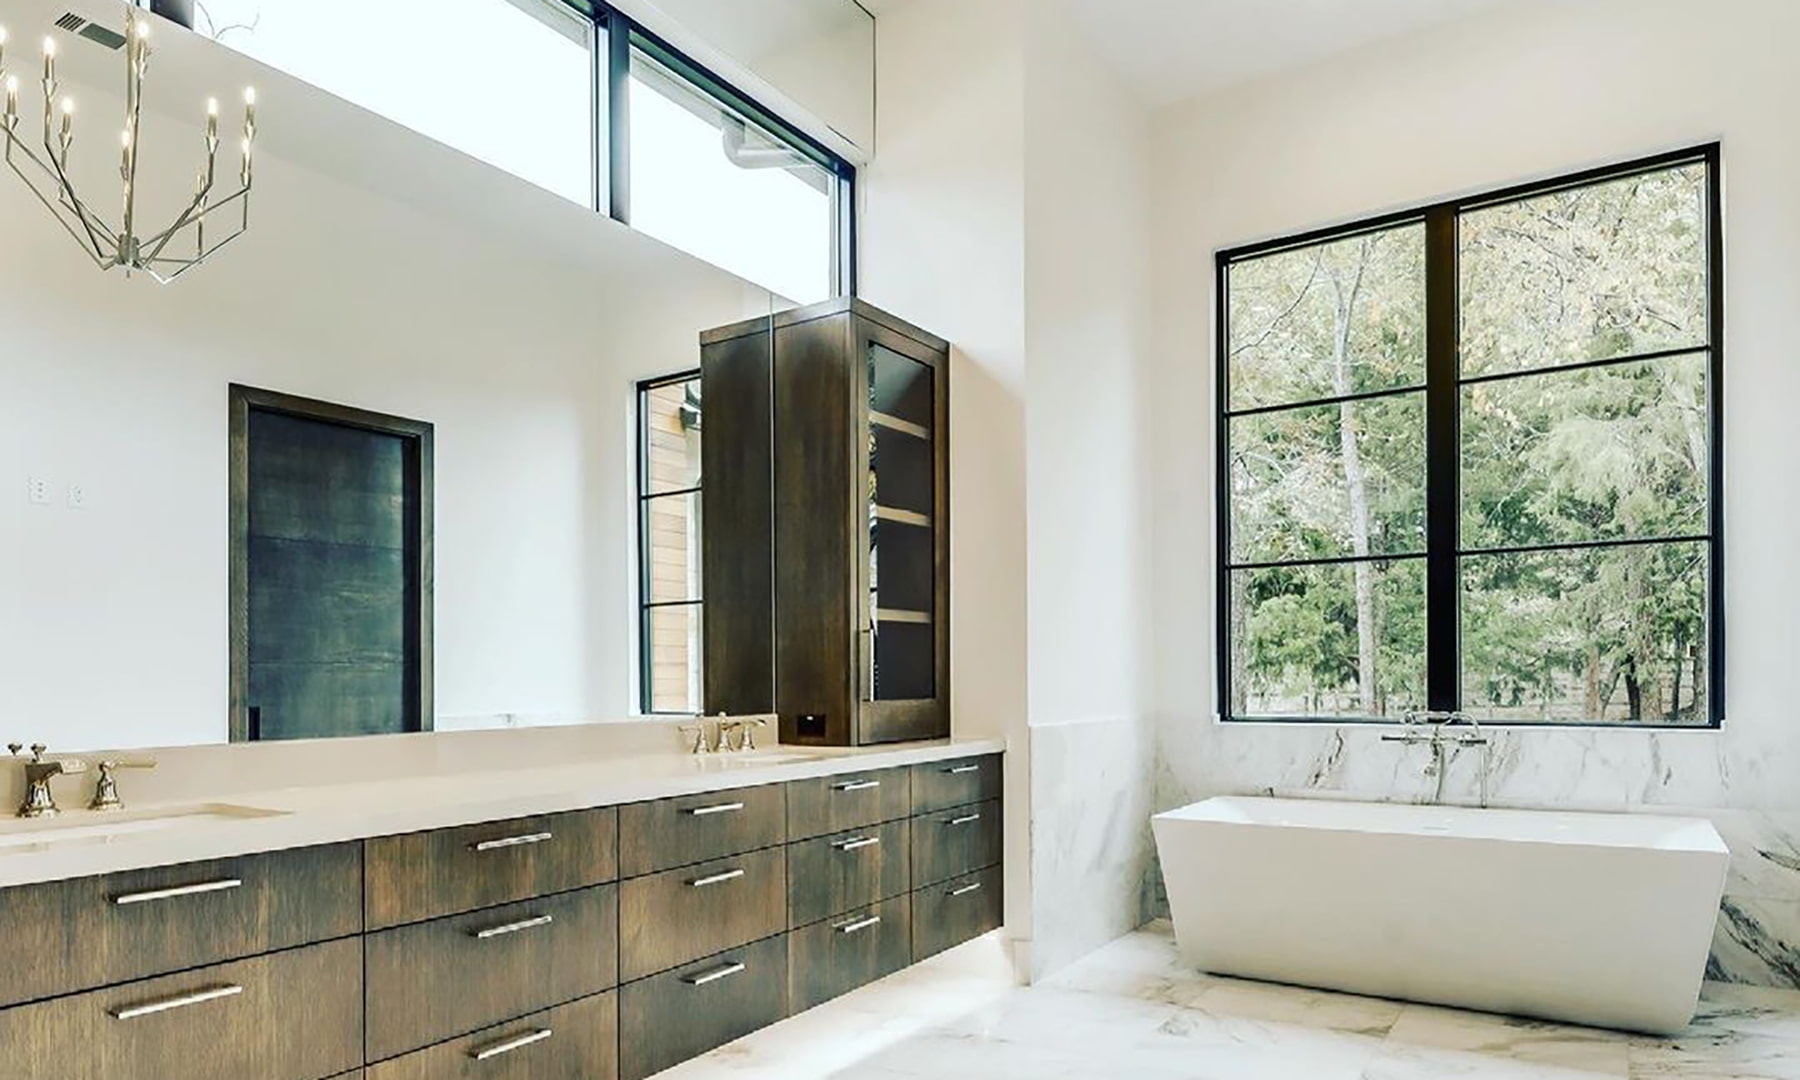 A contemporary bathroom with black picture windows over the white bathtub and wood vanity.